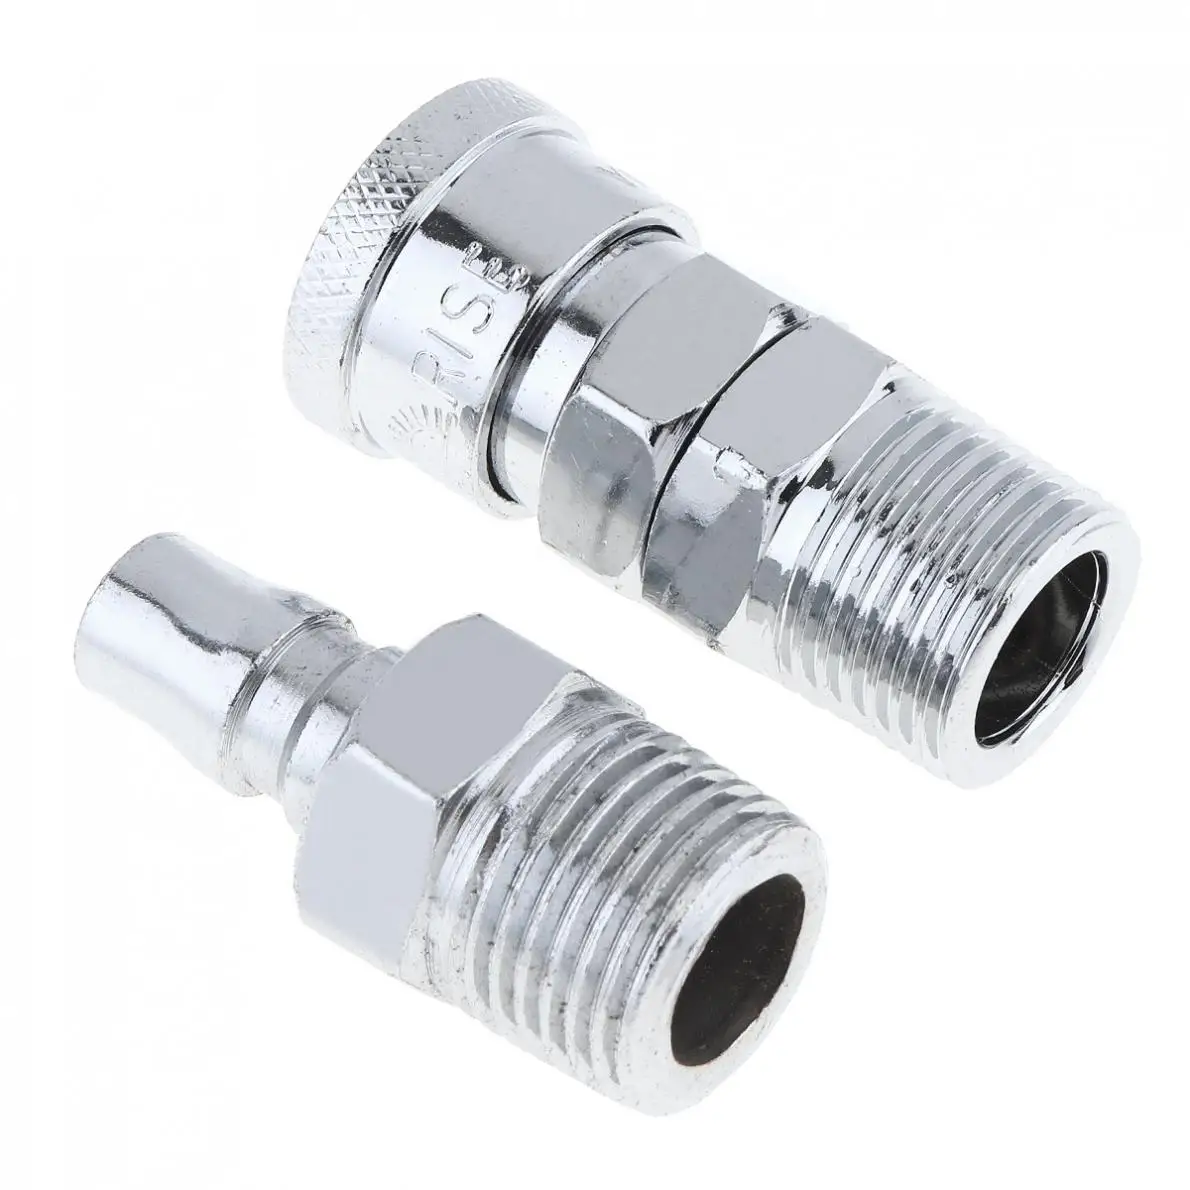 

2pcs/lot Silver TL-S12 40SM+PM High Speed Steel Pneumatic Fitting Quick High Pressure Connector